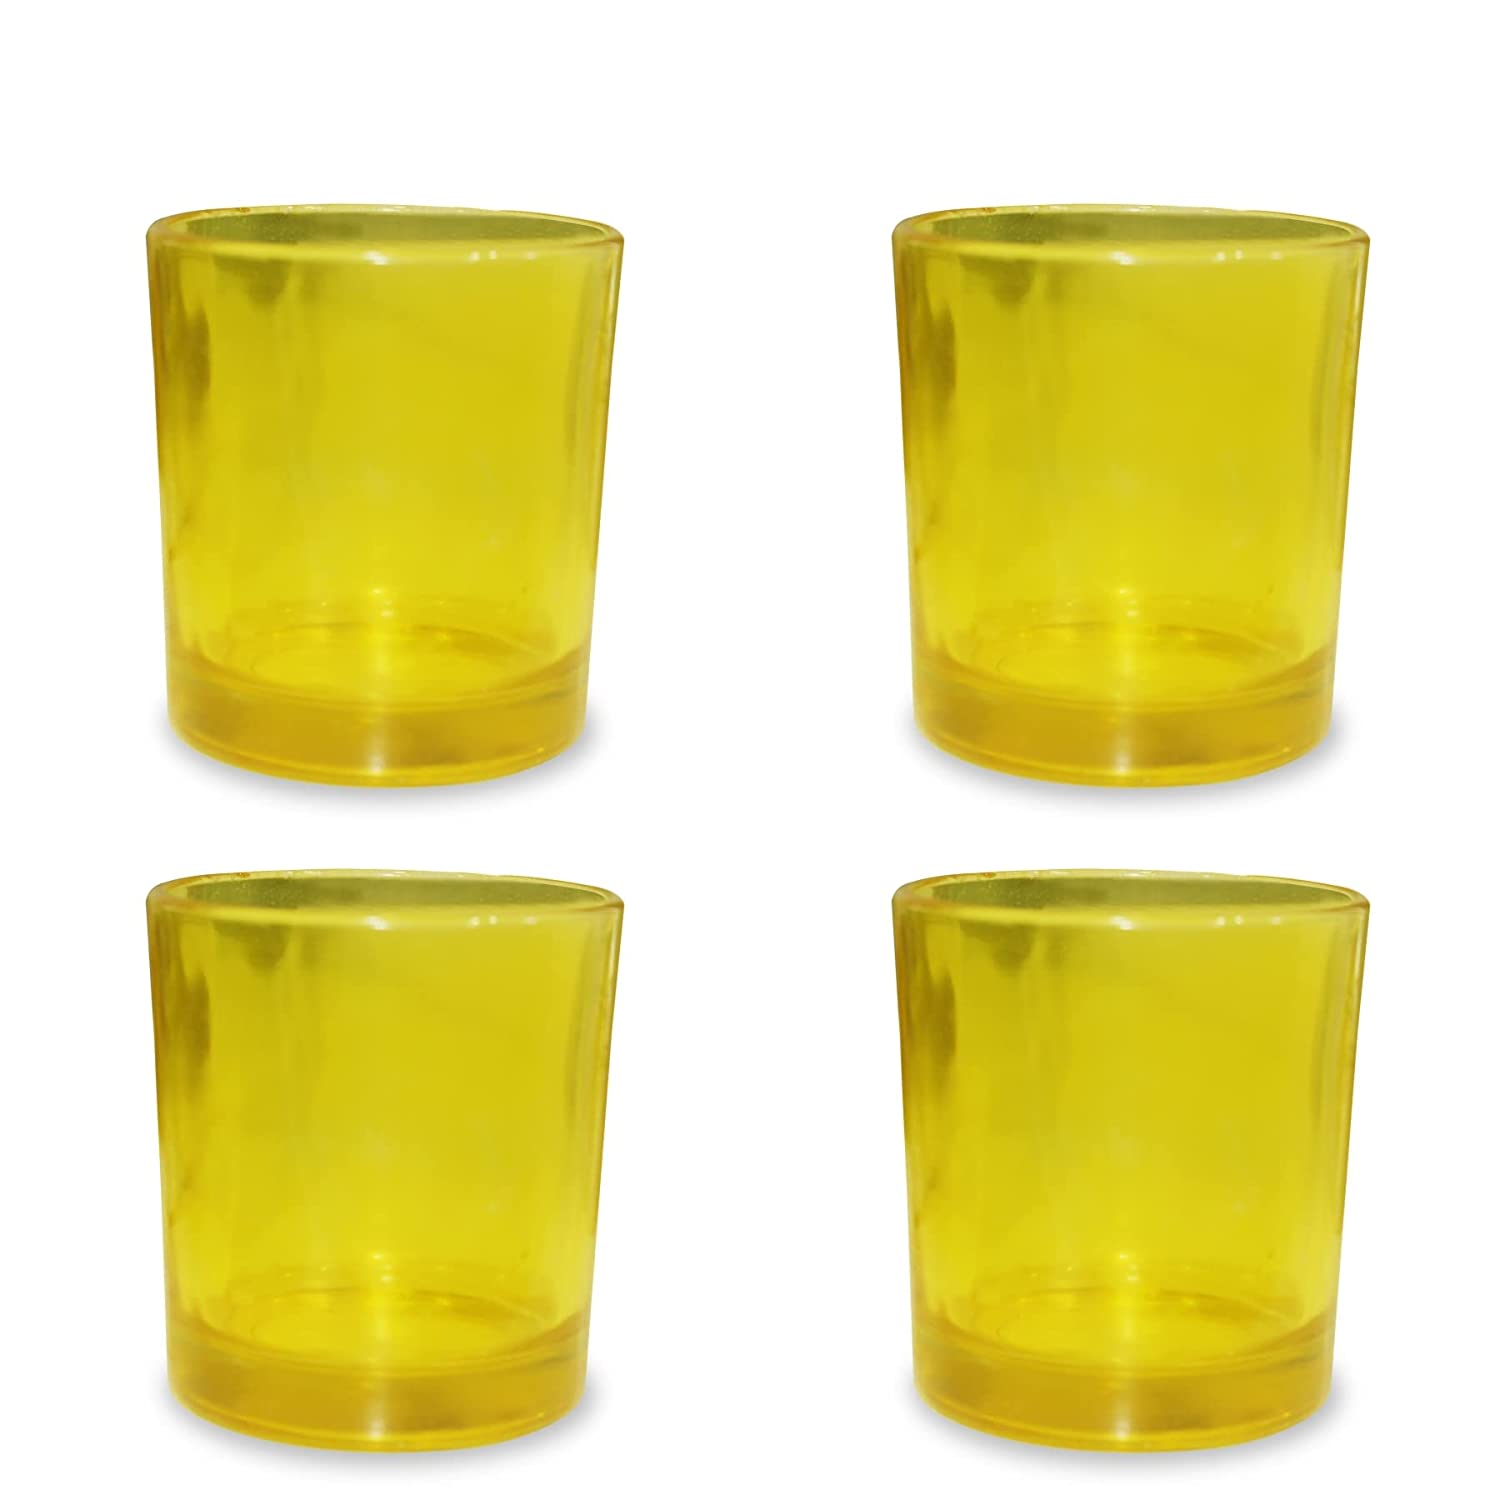 Shoprythm Packaging,Cosmetic Jar Pack of 4 Yellow Glass Candle Jar